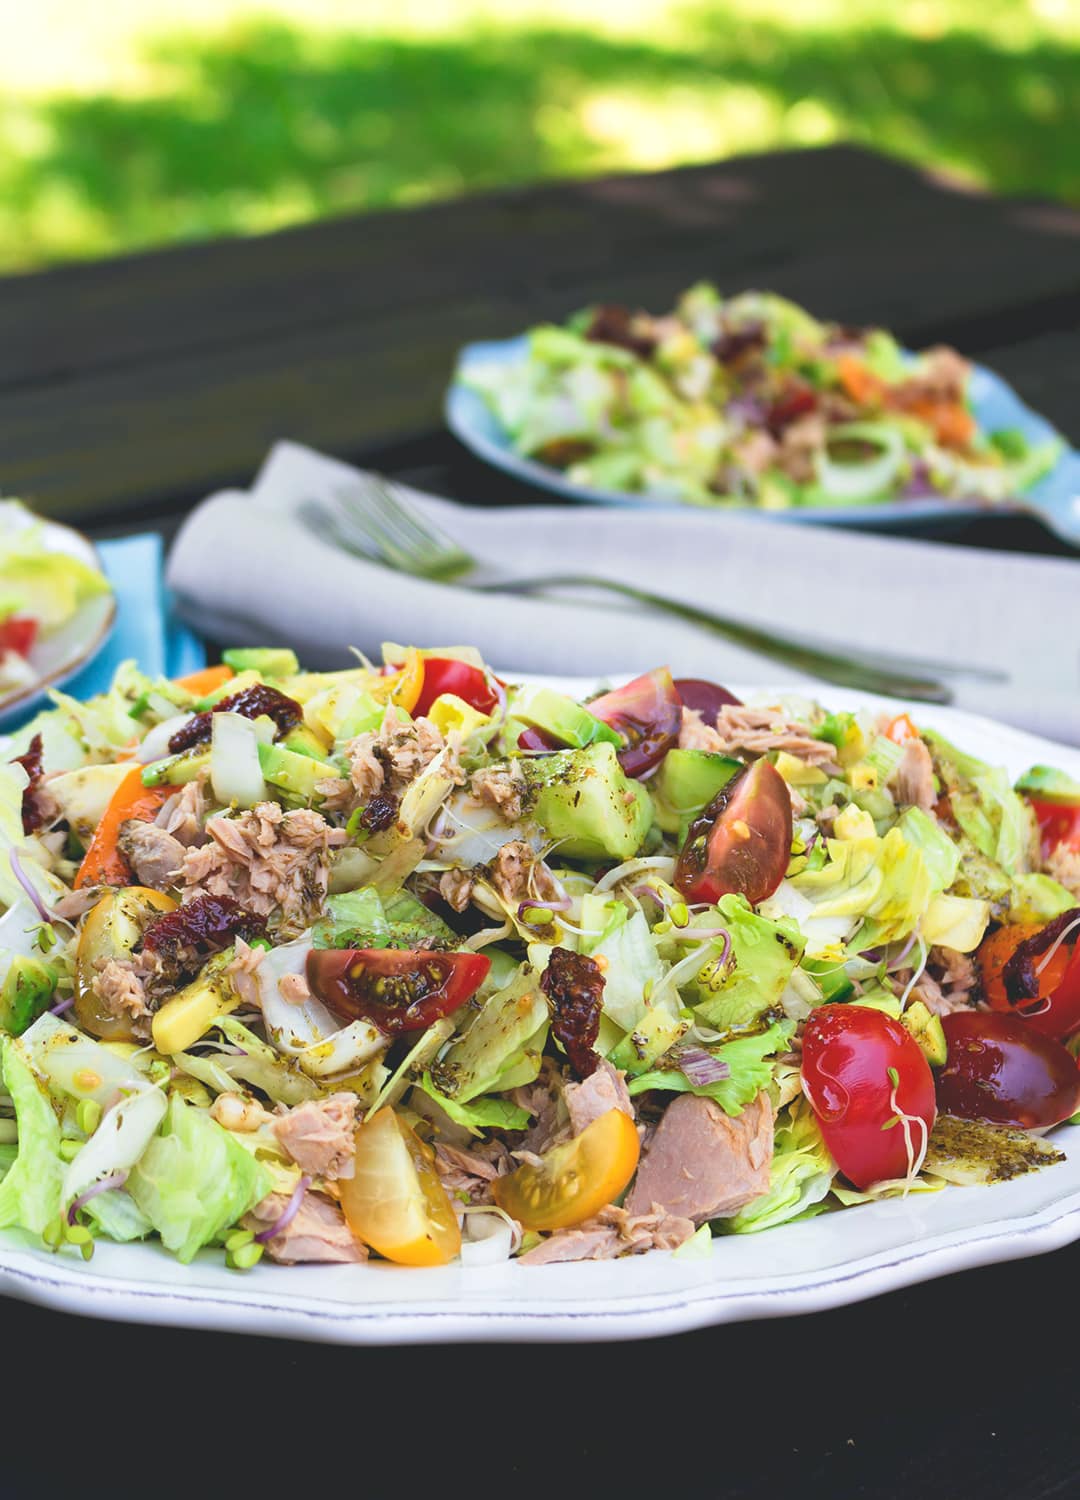 Colorful Salad with Tuna and Sundried Tomatoes - delicious easy every day summer lunch. A few ingredients include lettuce, cherry tomatoes, cucumber, avocado, and dressing. Great as packed lunch! | thehealthfulideas.com